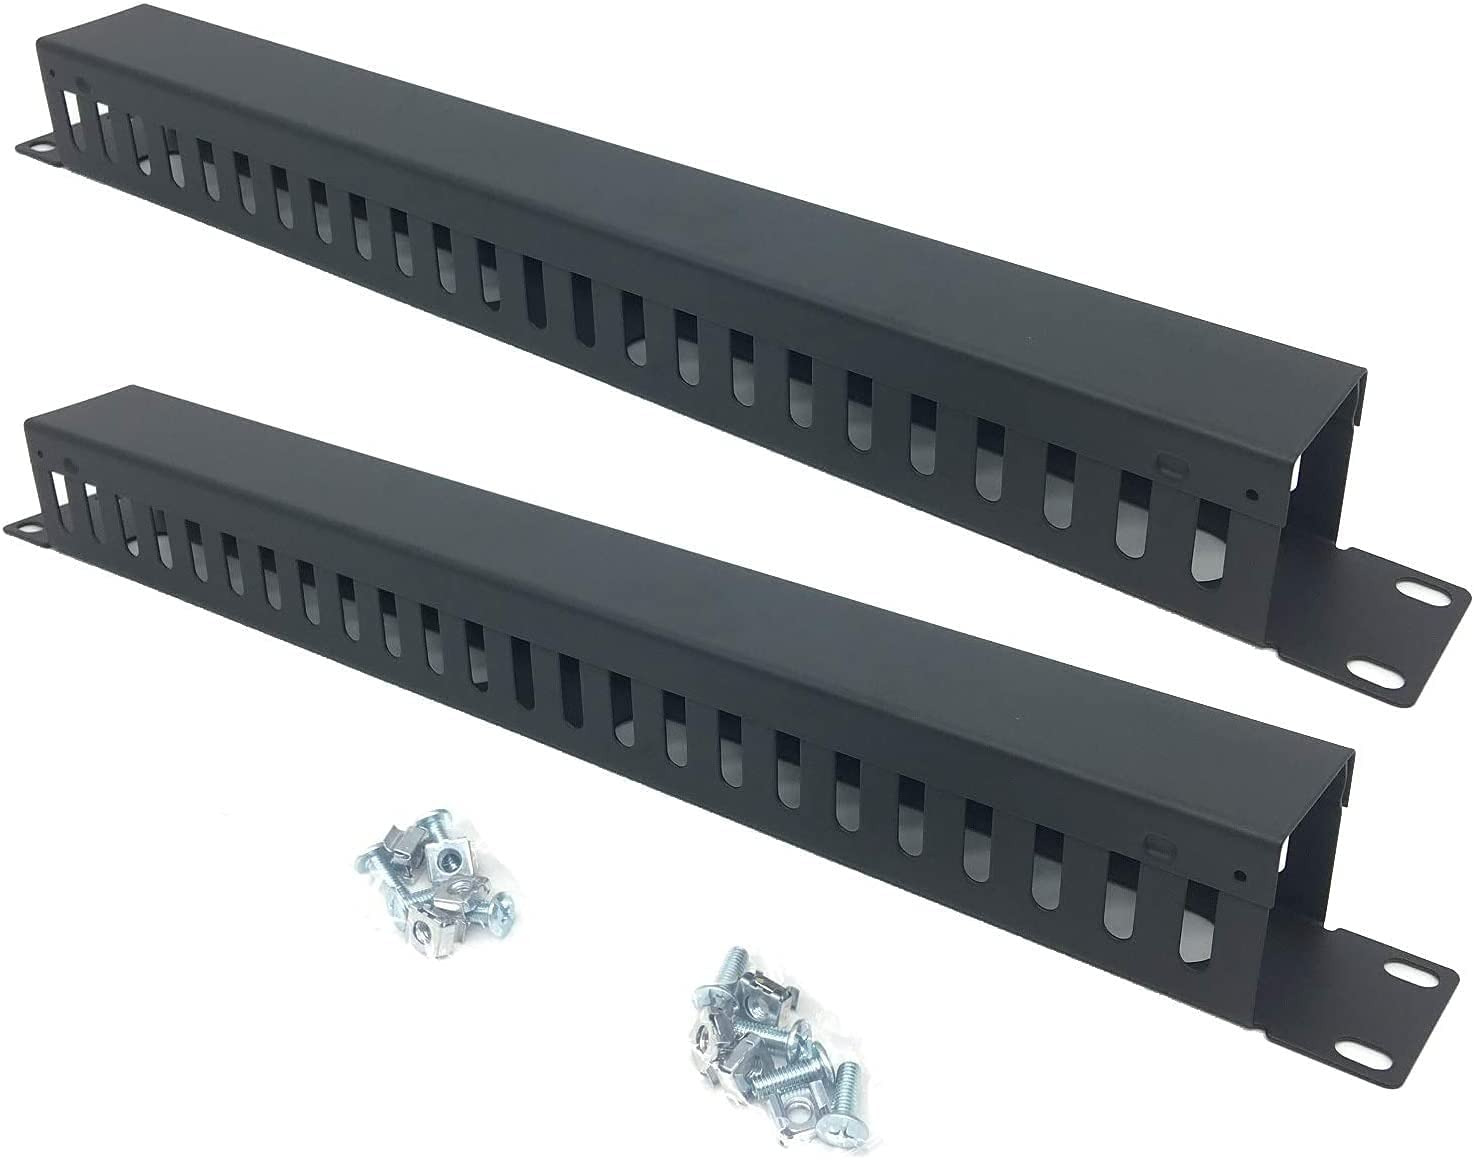 2 Pack 1U 19 Inch Cable Manager Horizontal Rack Mount 24 Slot Metal Finger Duct 